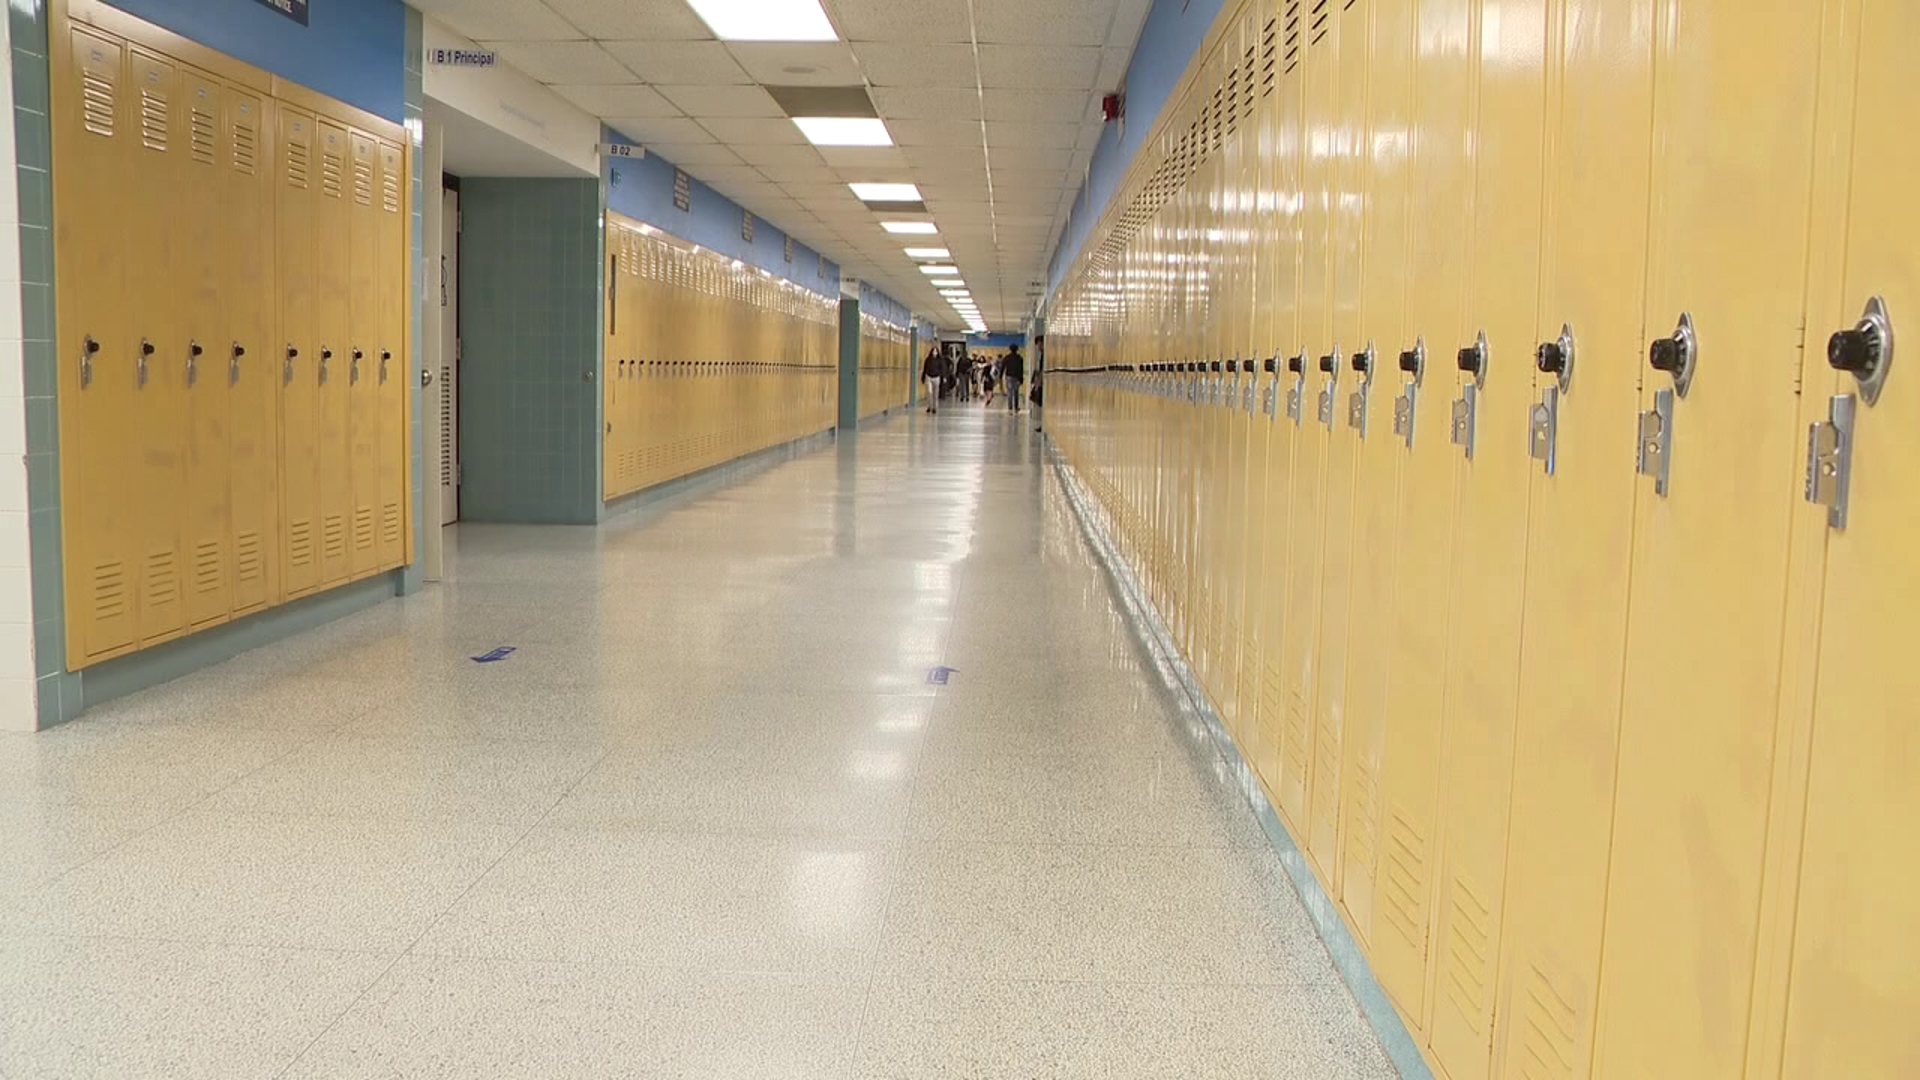 Scary situations at schools have become far too common across Luzerne and Lackawanna counties. At Hanover Area, officials are being proactive about school safety.